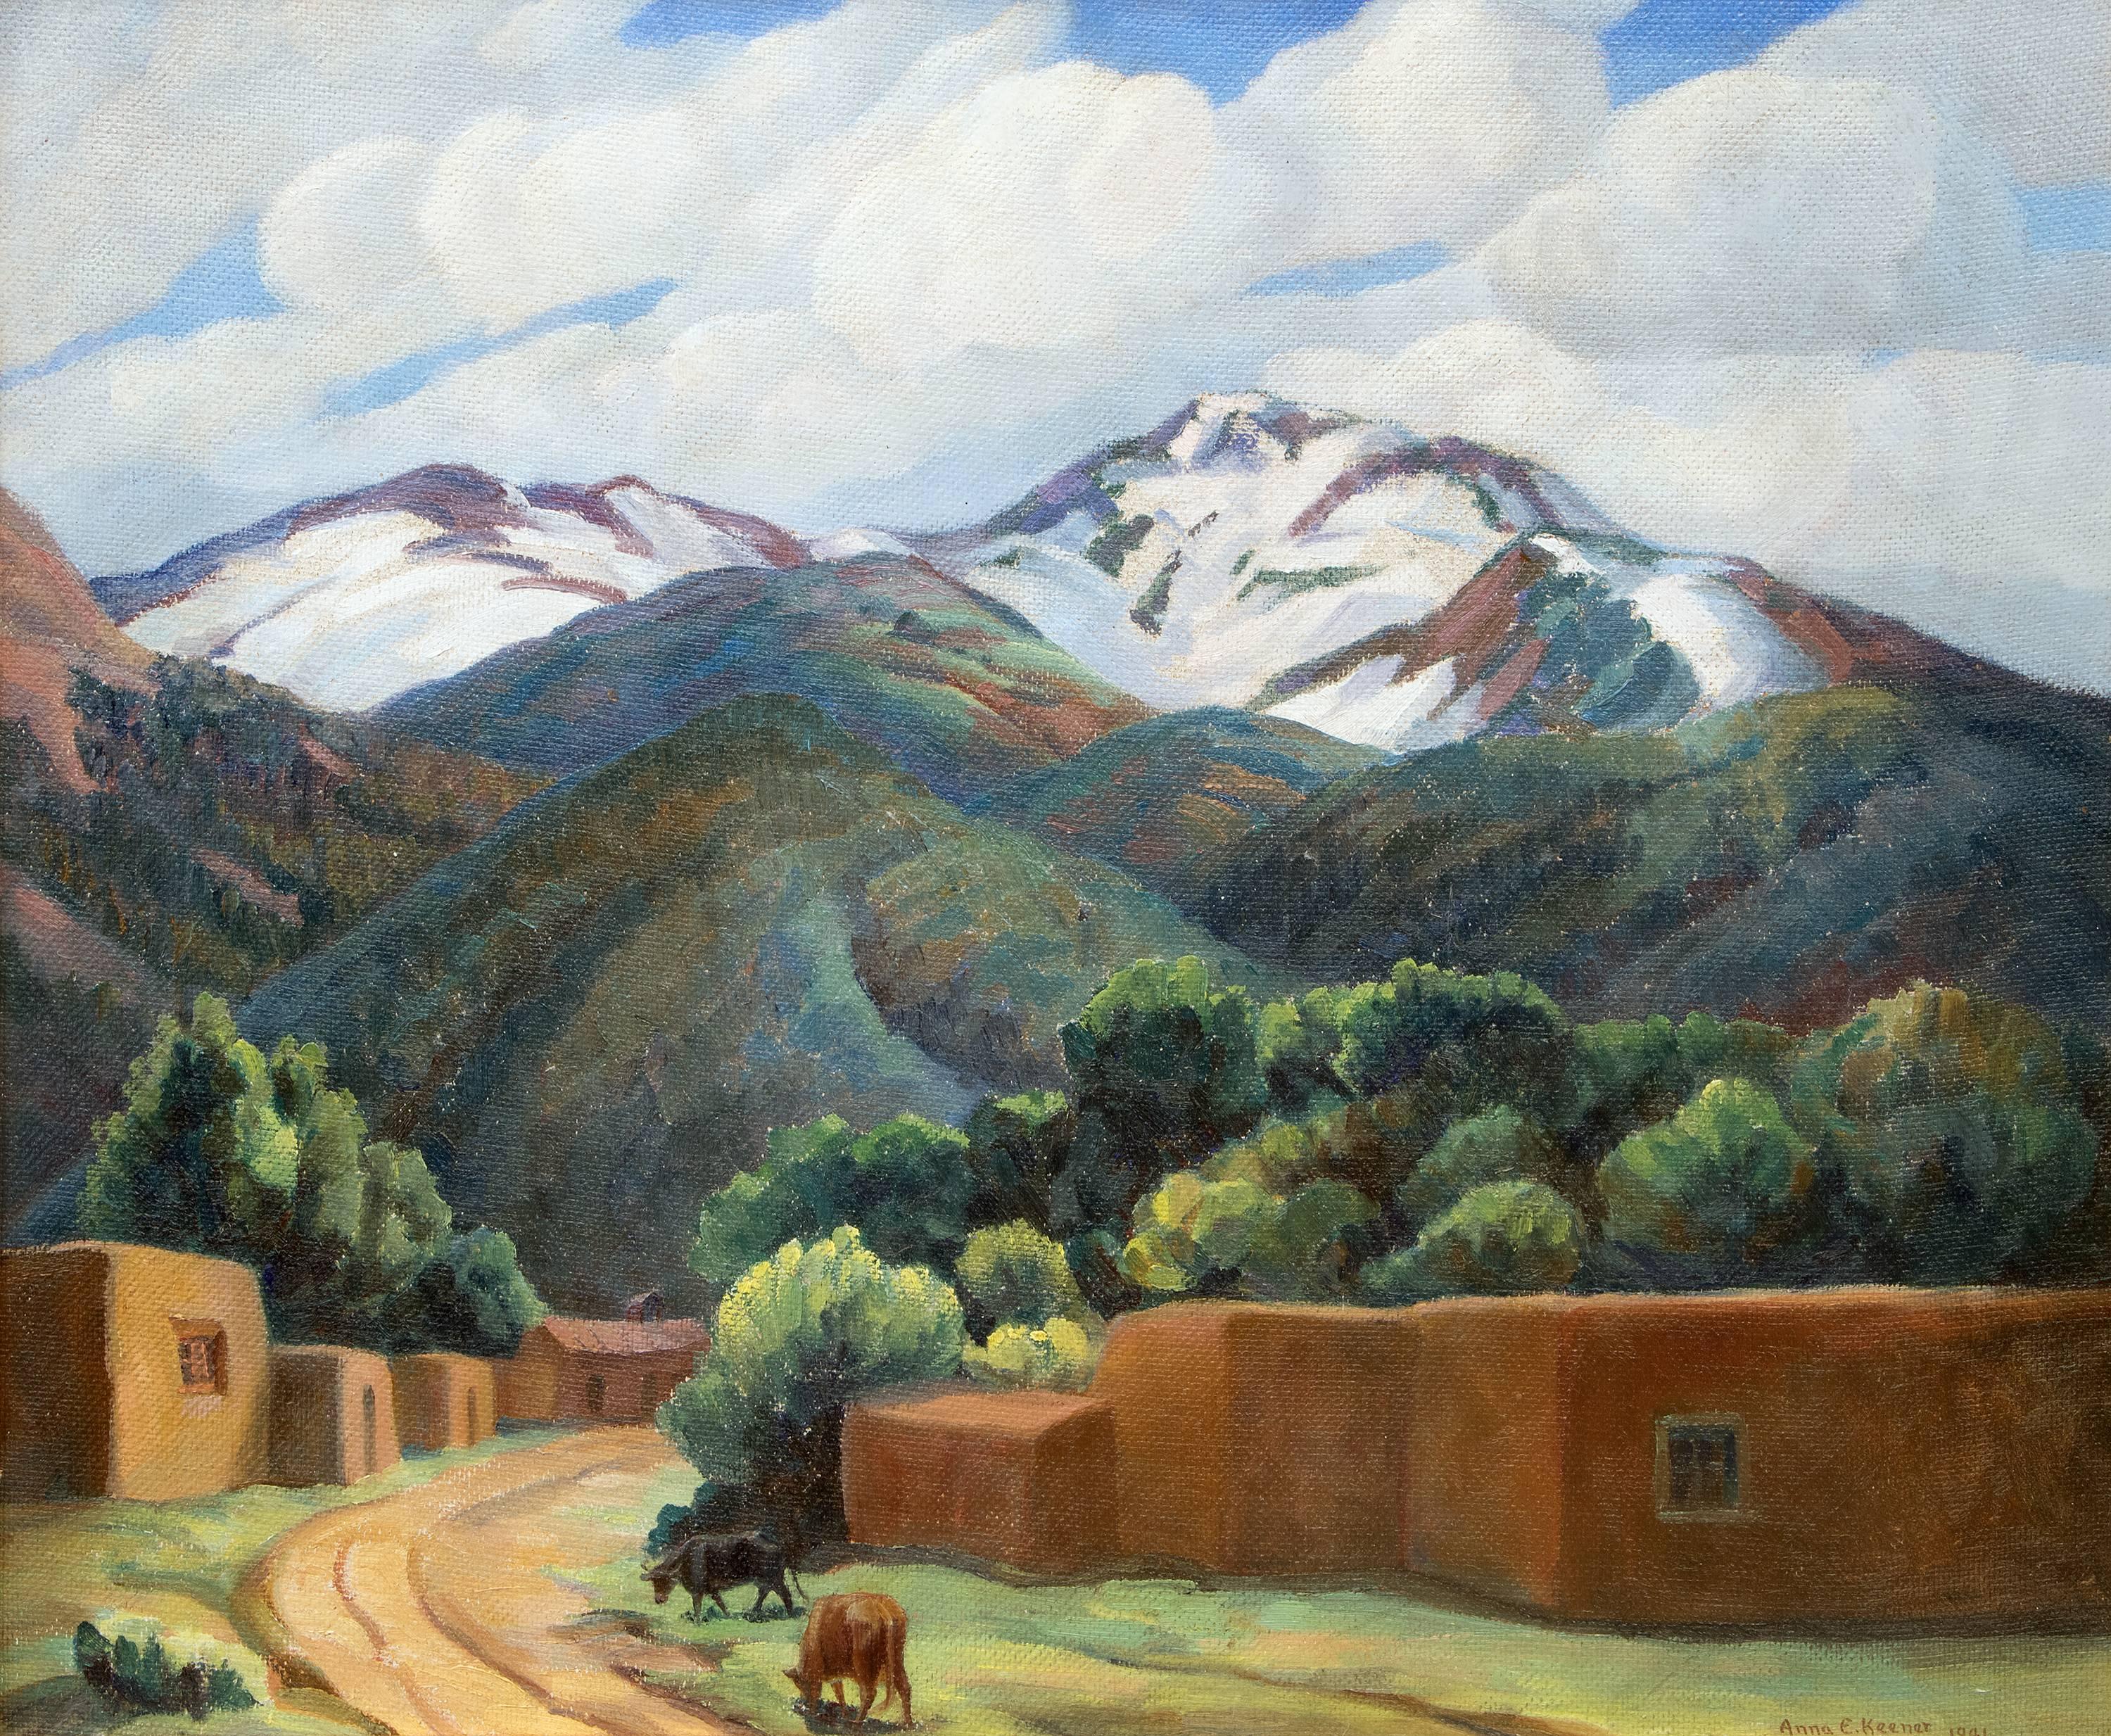 Arroyo Seco - Near Taos, New Mexico - Painting by Anna Keener